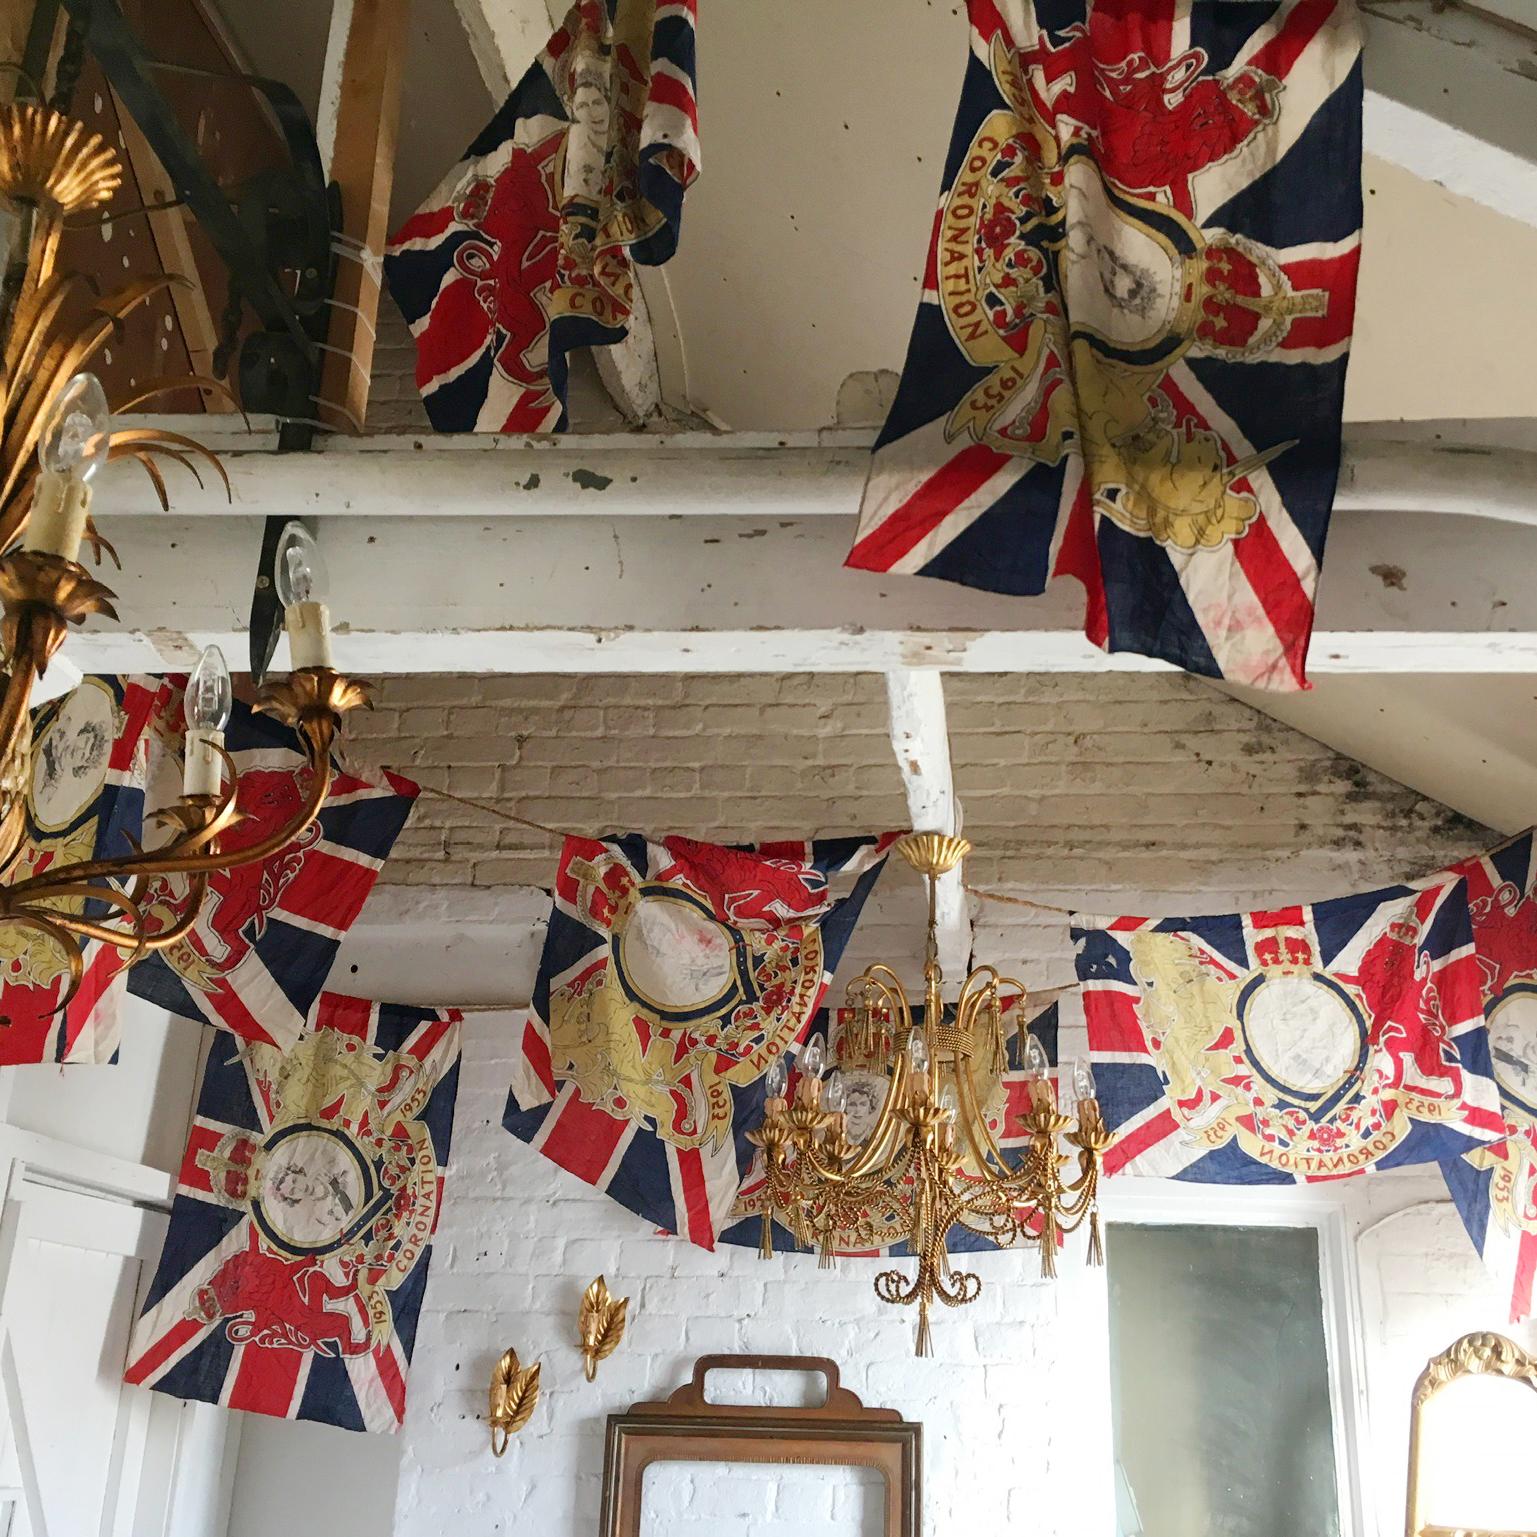 A Rare And Historical Royal Coronation Flag Bunting from The Coronation Of HRH Queen Elizabeth 2nd, June 2nd 1953

Due To The Size This Bunting Would Have Been Used Strung Across A Road Or Over A Building For One Of The Many Street Parties Held To